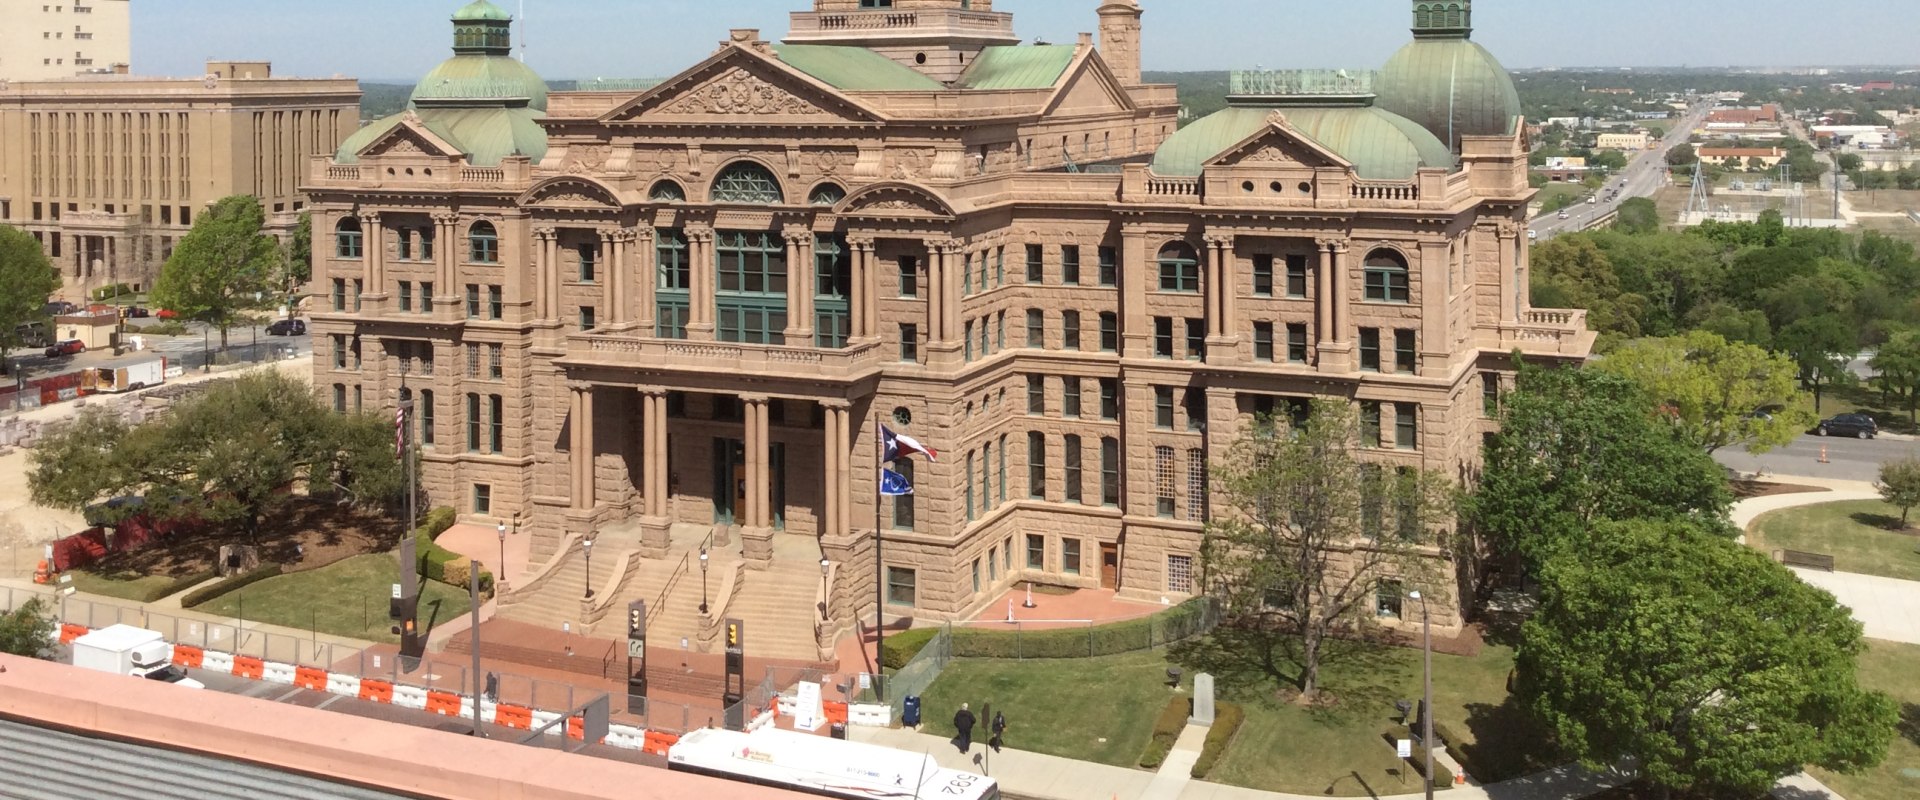 The Fascinating and Rich History of Tarrant County, Texas